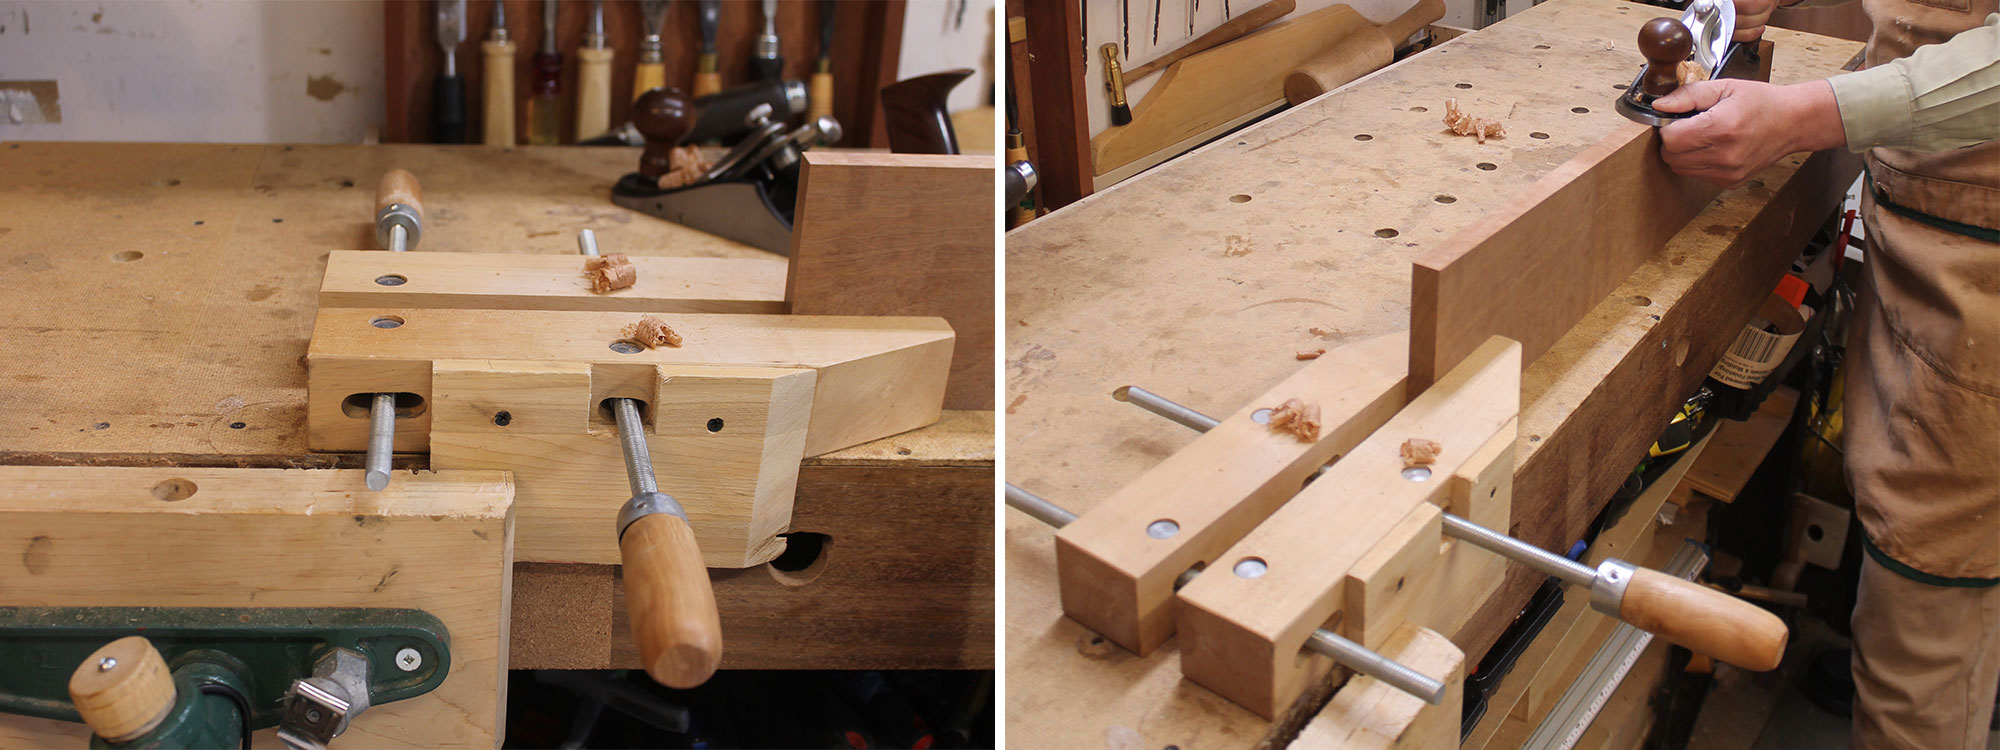 Image left: Using a handscrew with a bench vise. Image right: Using the clamp as a vise on the bench top.